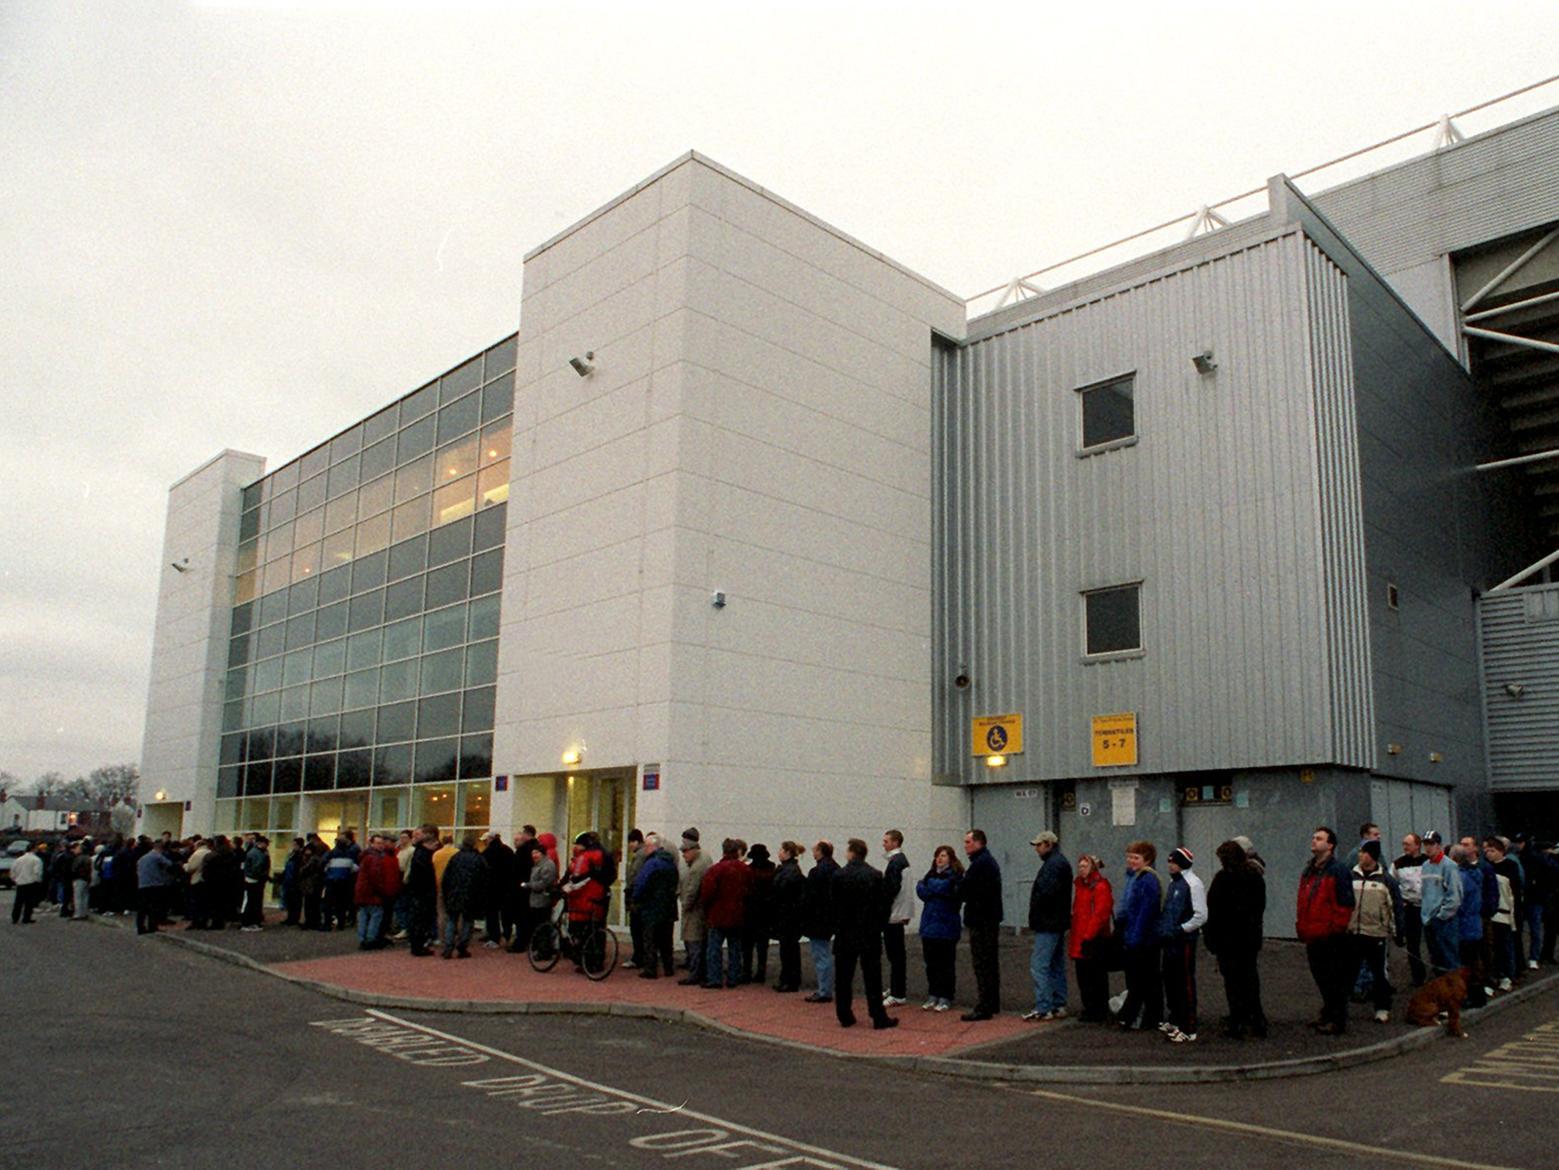 Preston fans queue for tickets for the FA Cup visit to Everton in 2000